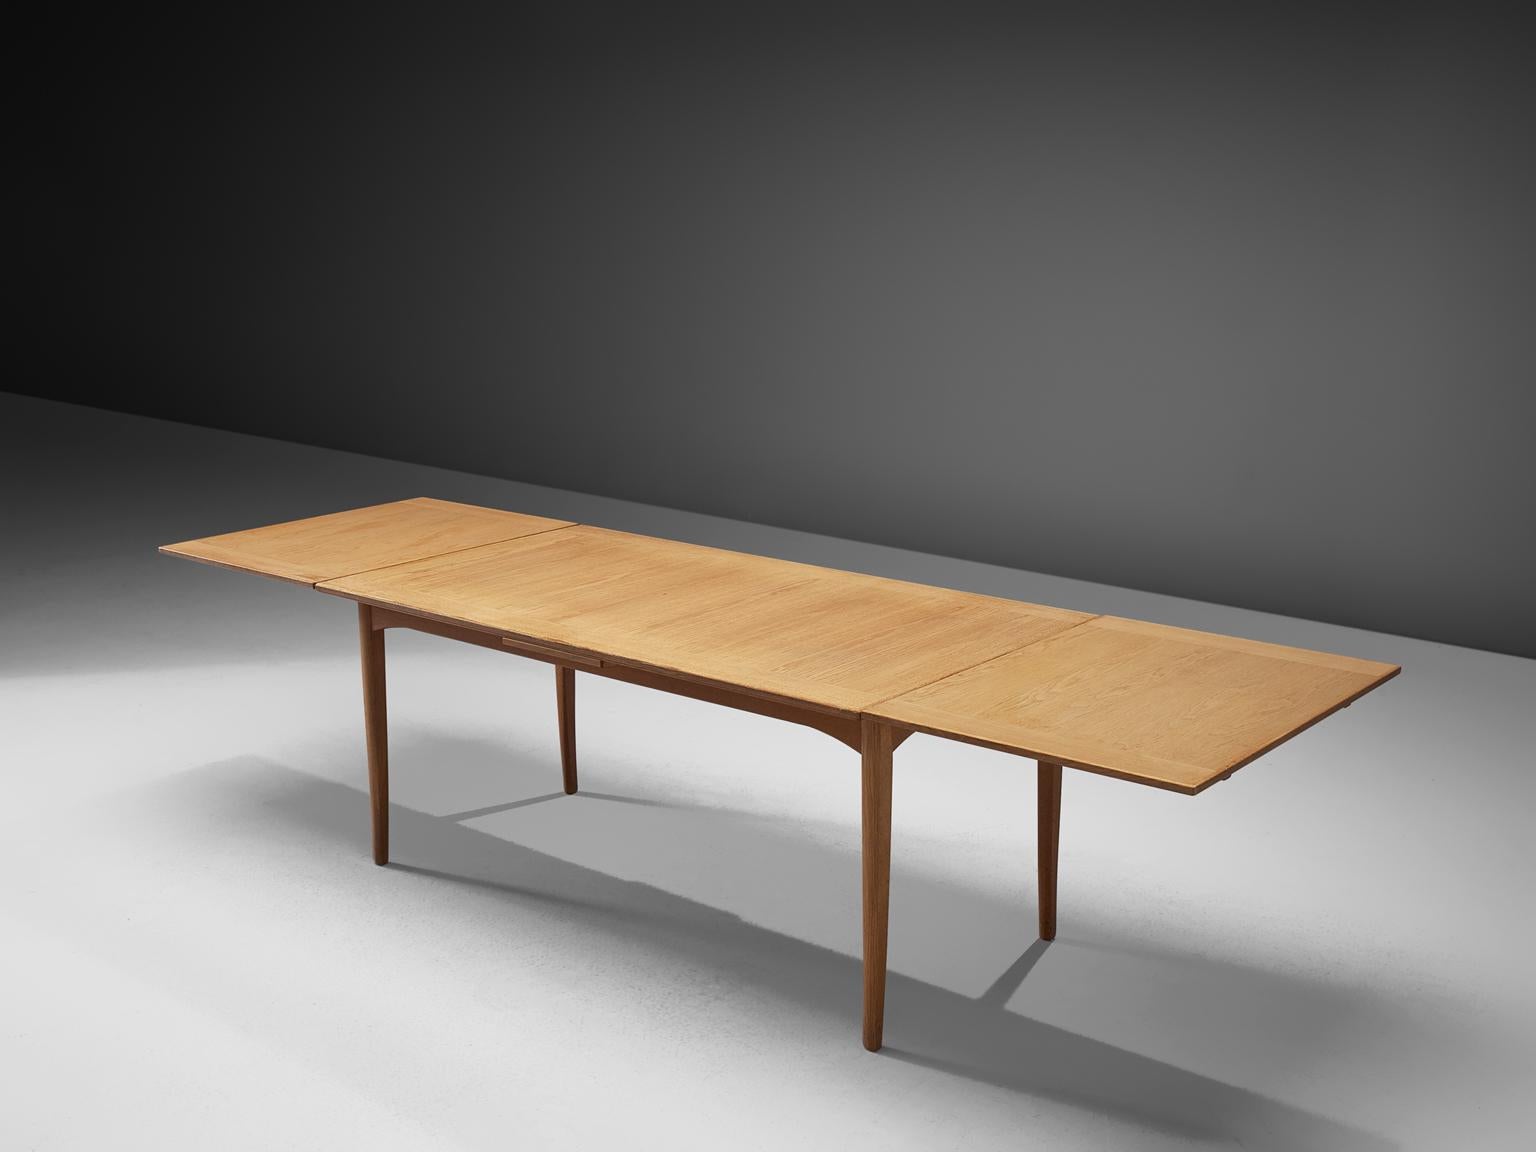 Carl Malmsten, extendable table in oak, Denmark, 1960s.

This well proportioned extendable table has a straight shaped top, it features straight edges and four straight, solid oak legs. The clear shape of the top and the wonderful, modest